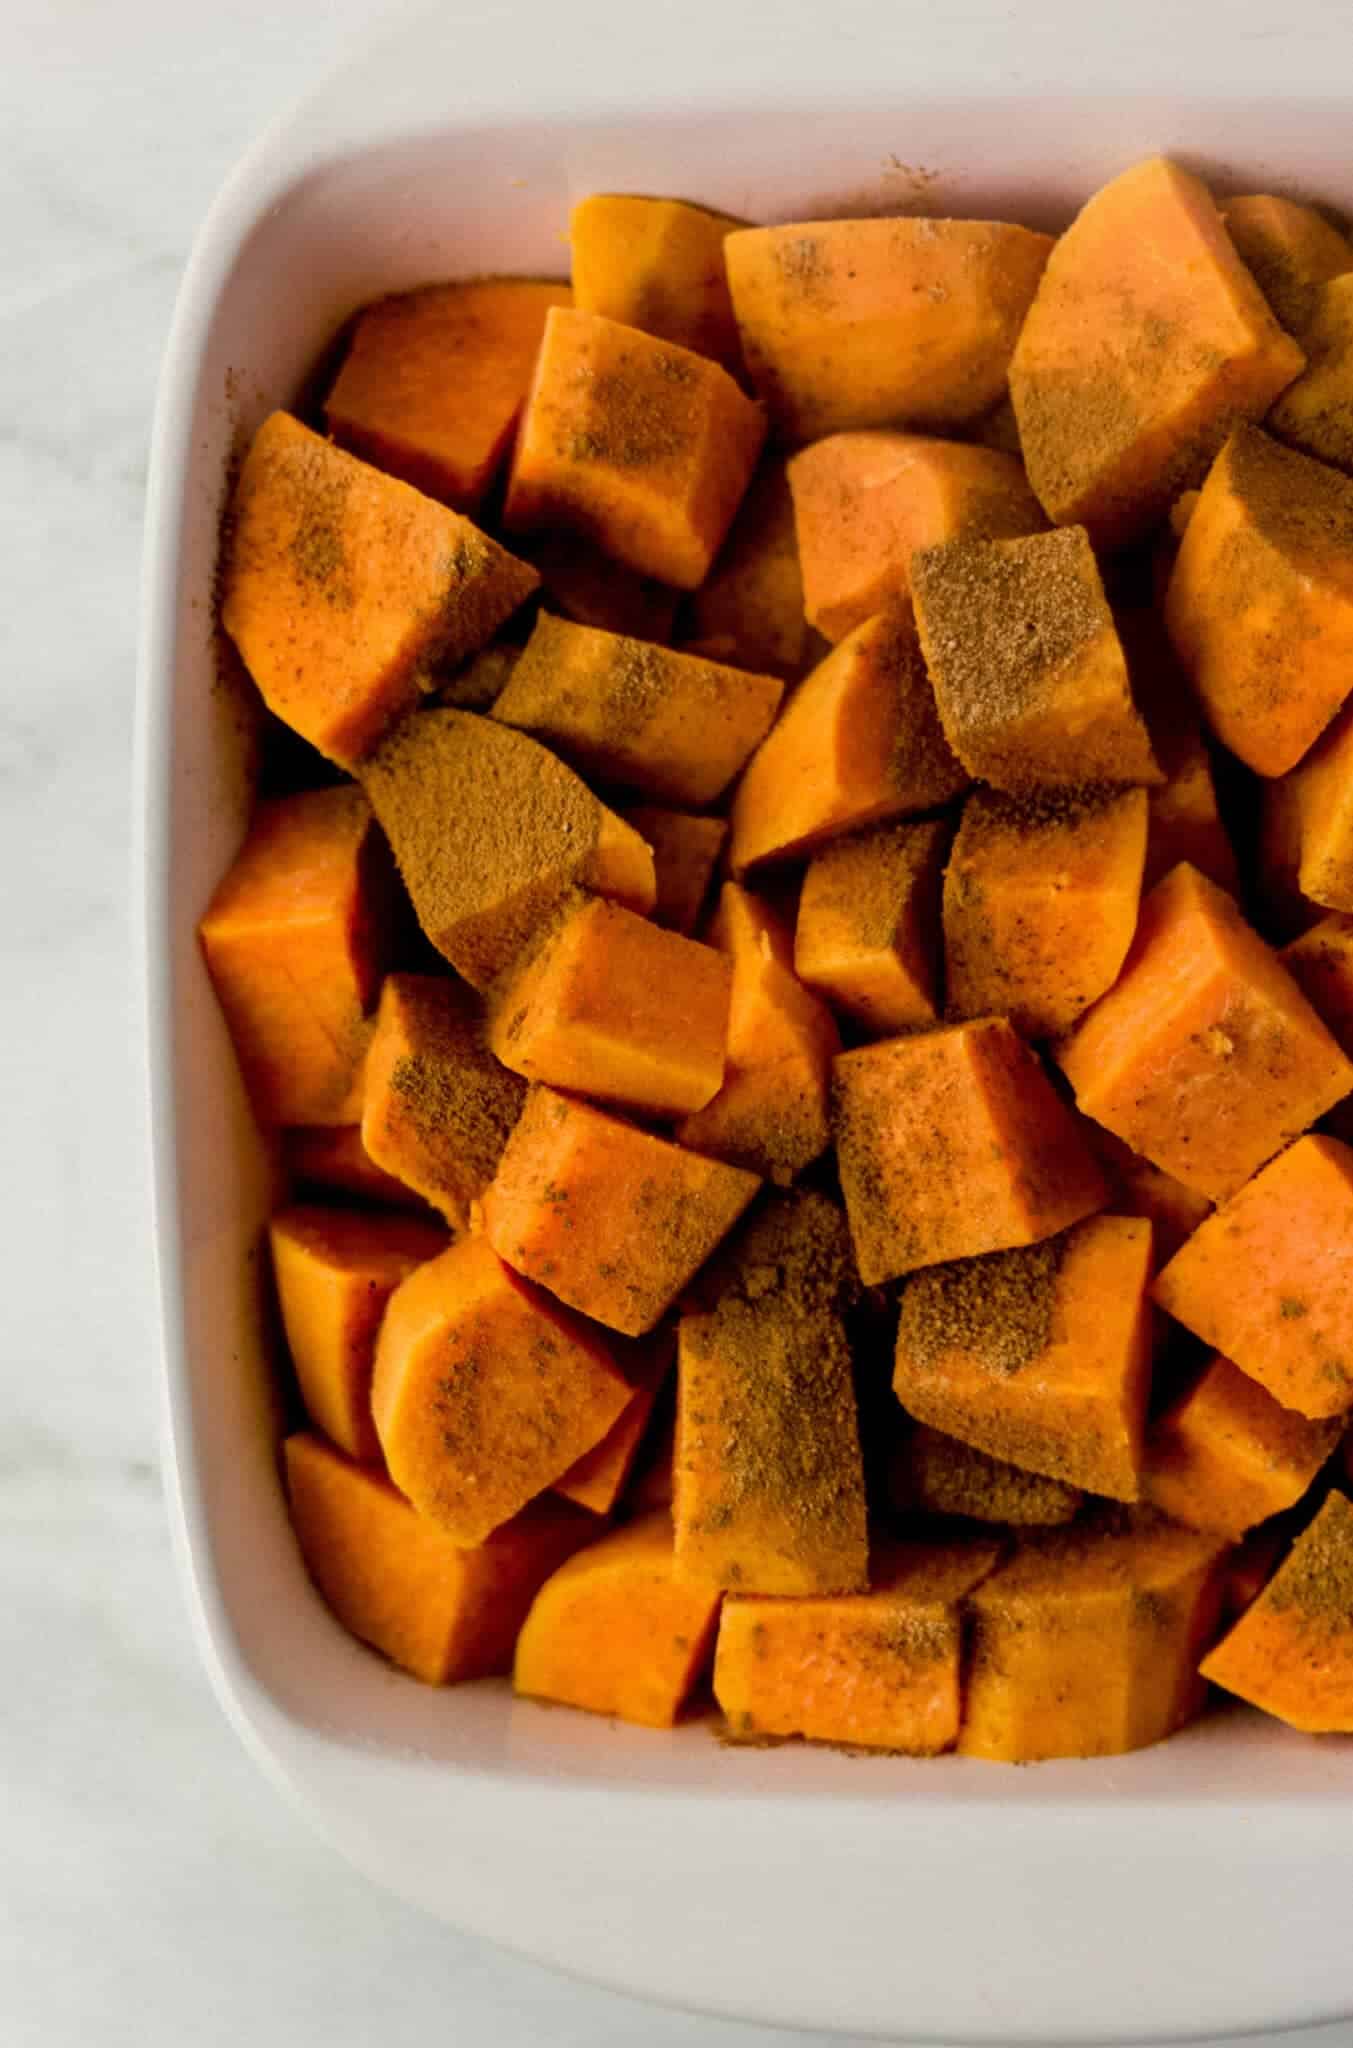 cooked sweet potatoes added to white square baking dish and topped with cinnamon and nutmeg